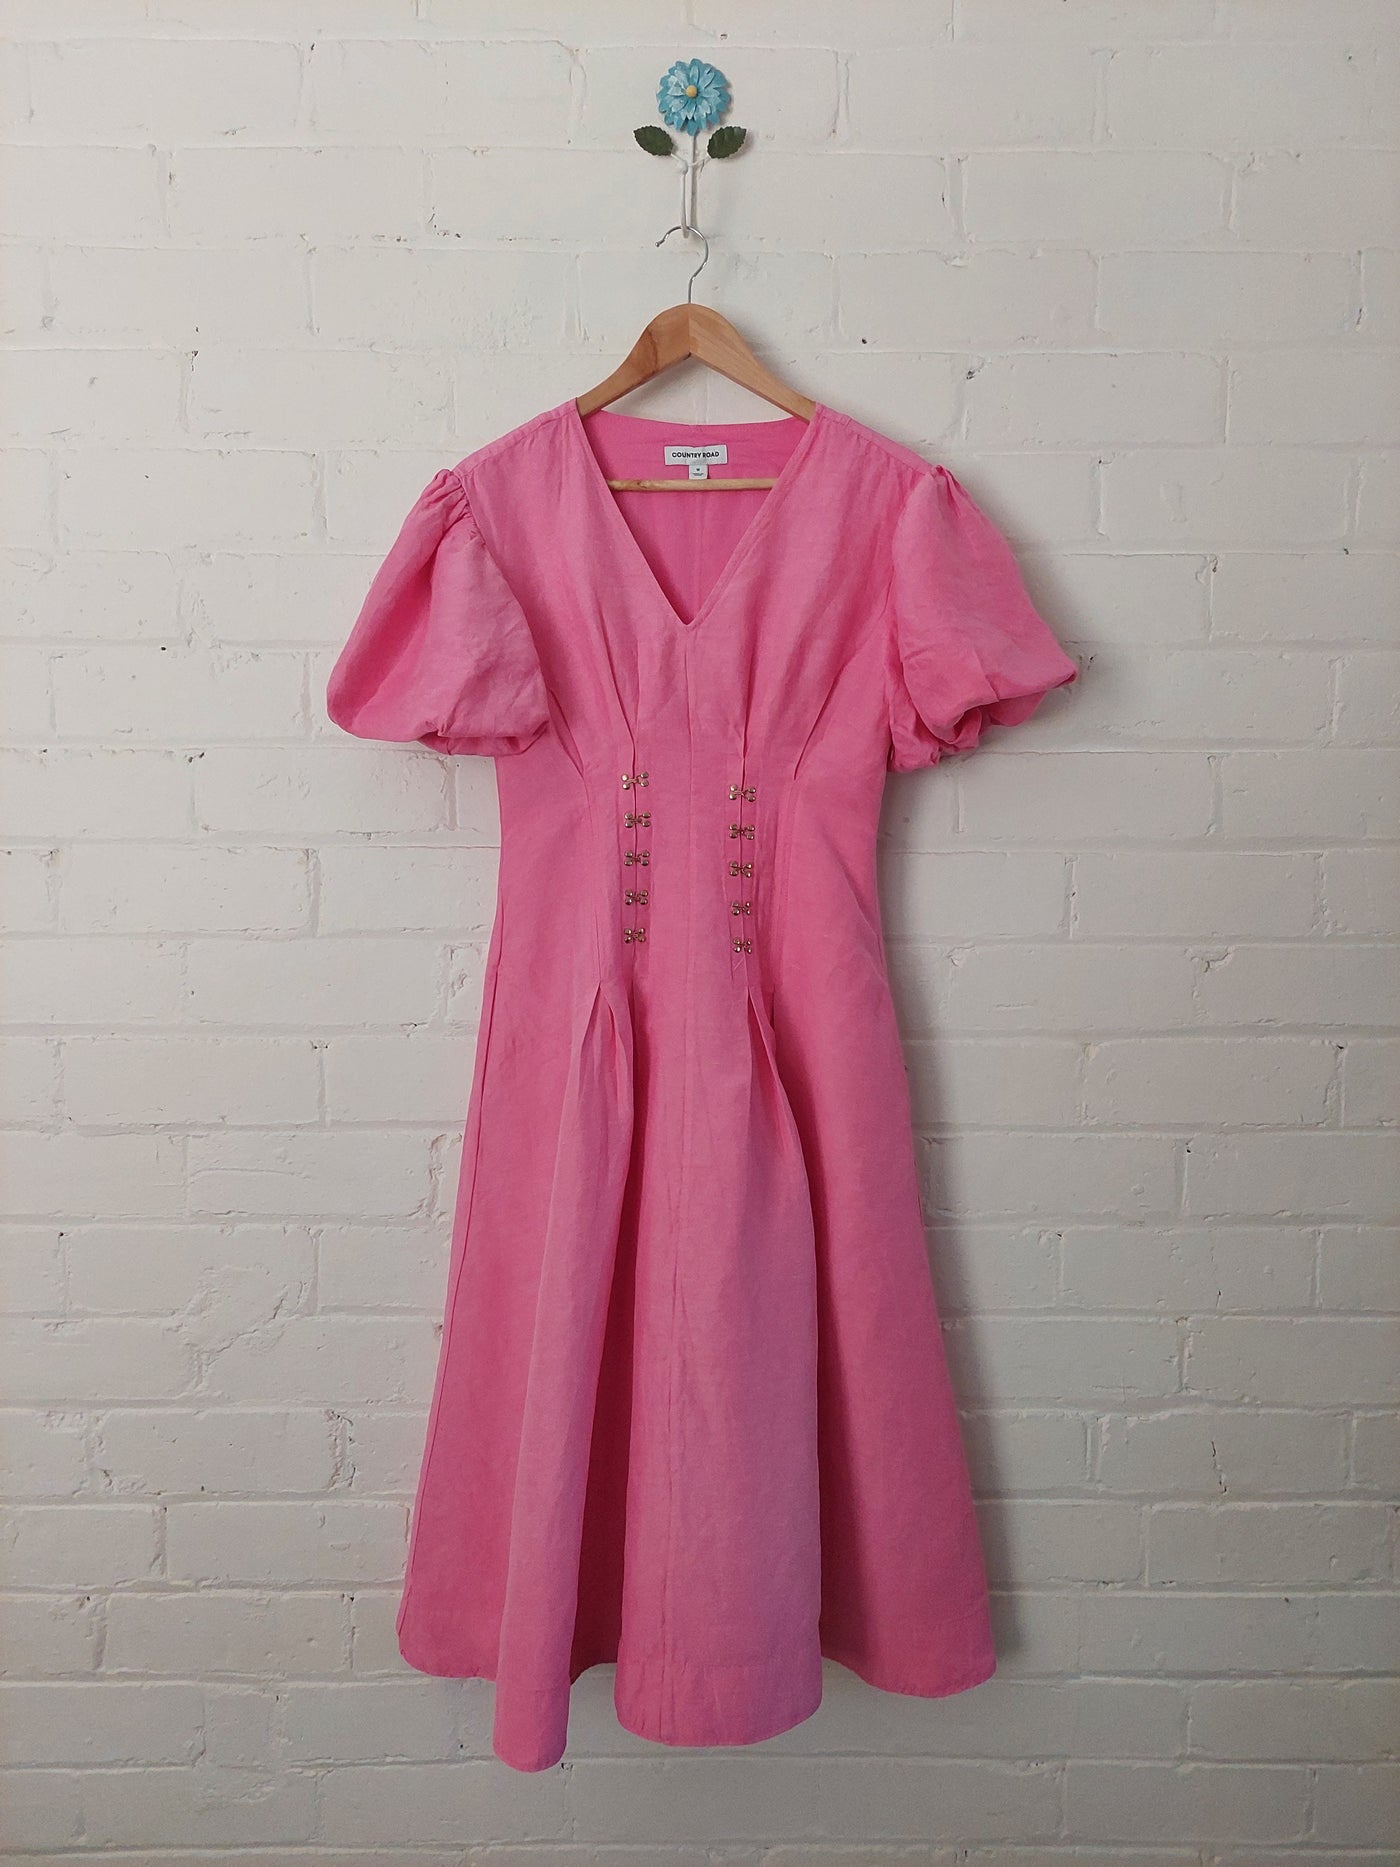 Country Road Cinched Midi Dress - Pink, Size 10